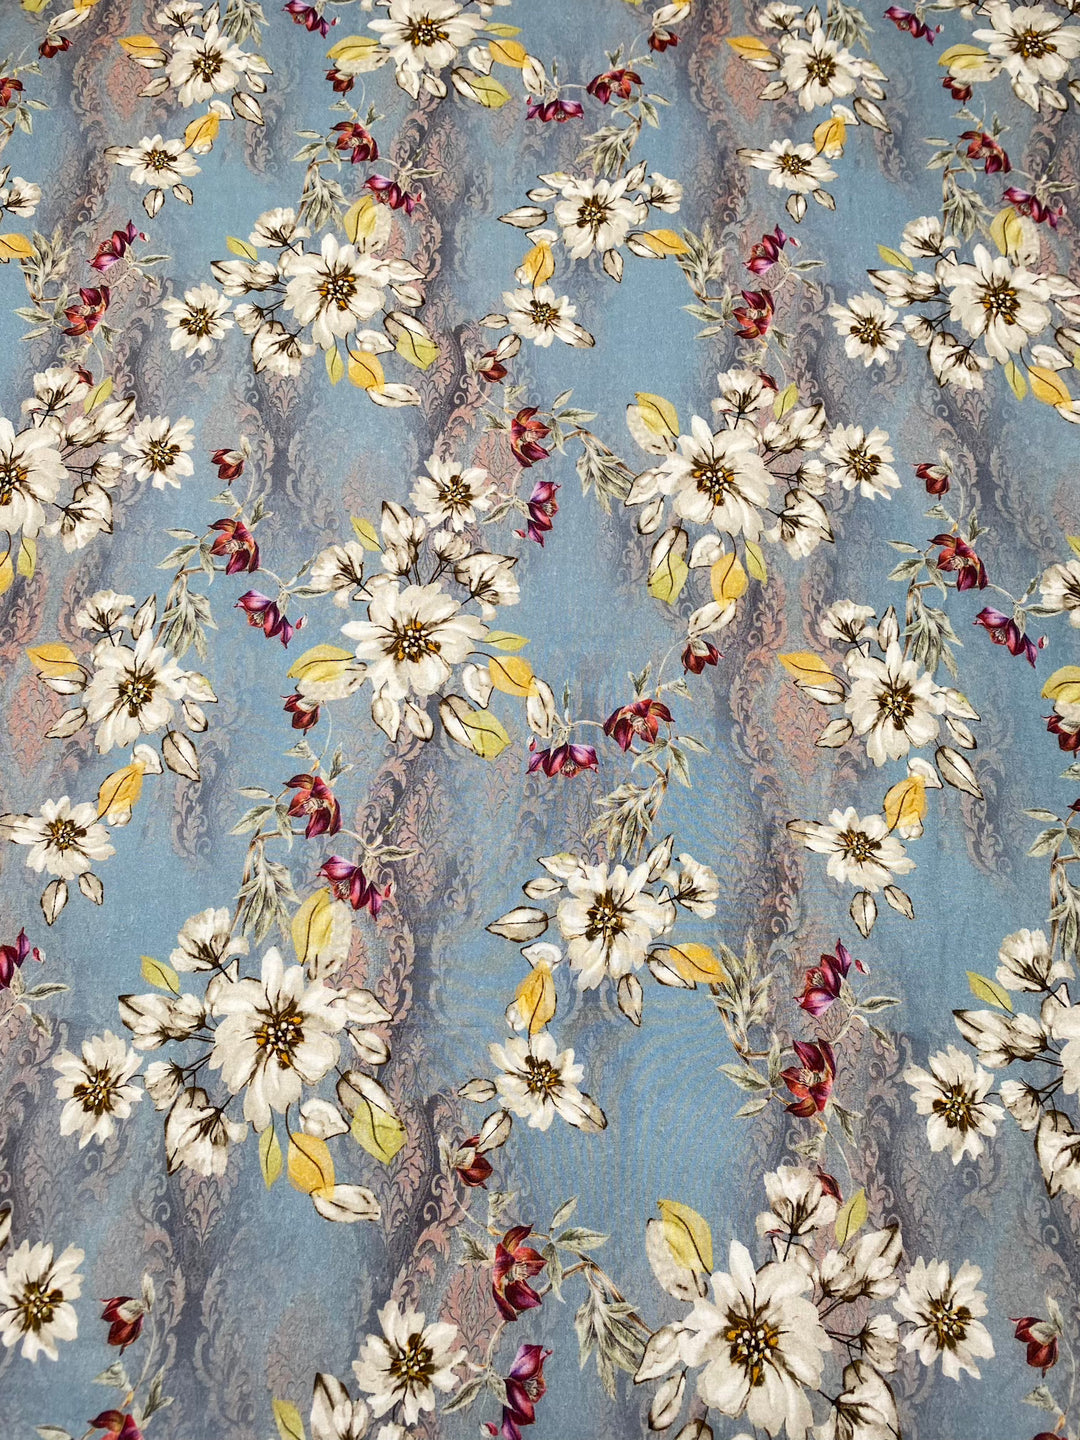 Printed Floral Cotton Fabric Blue